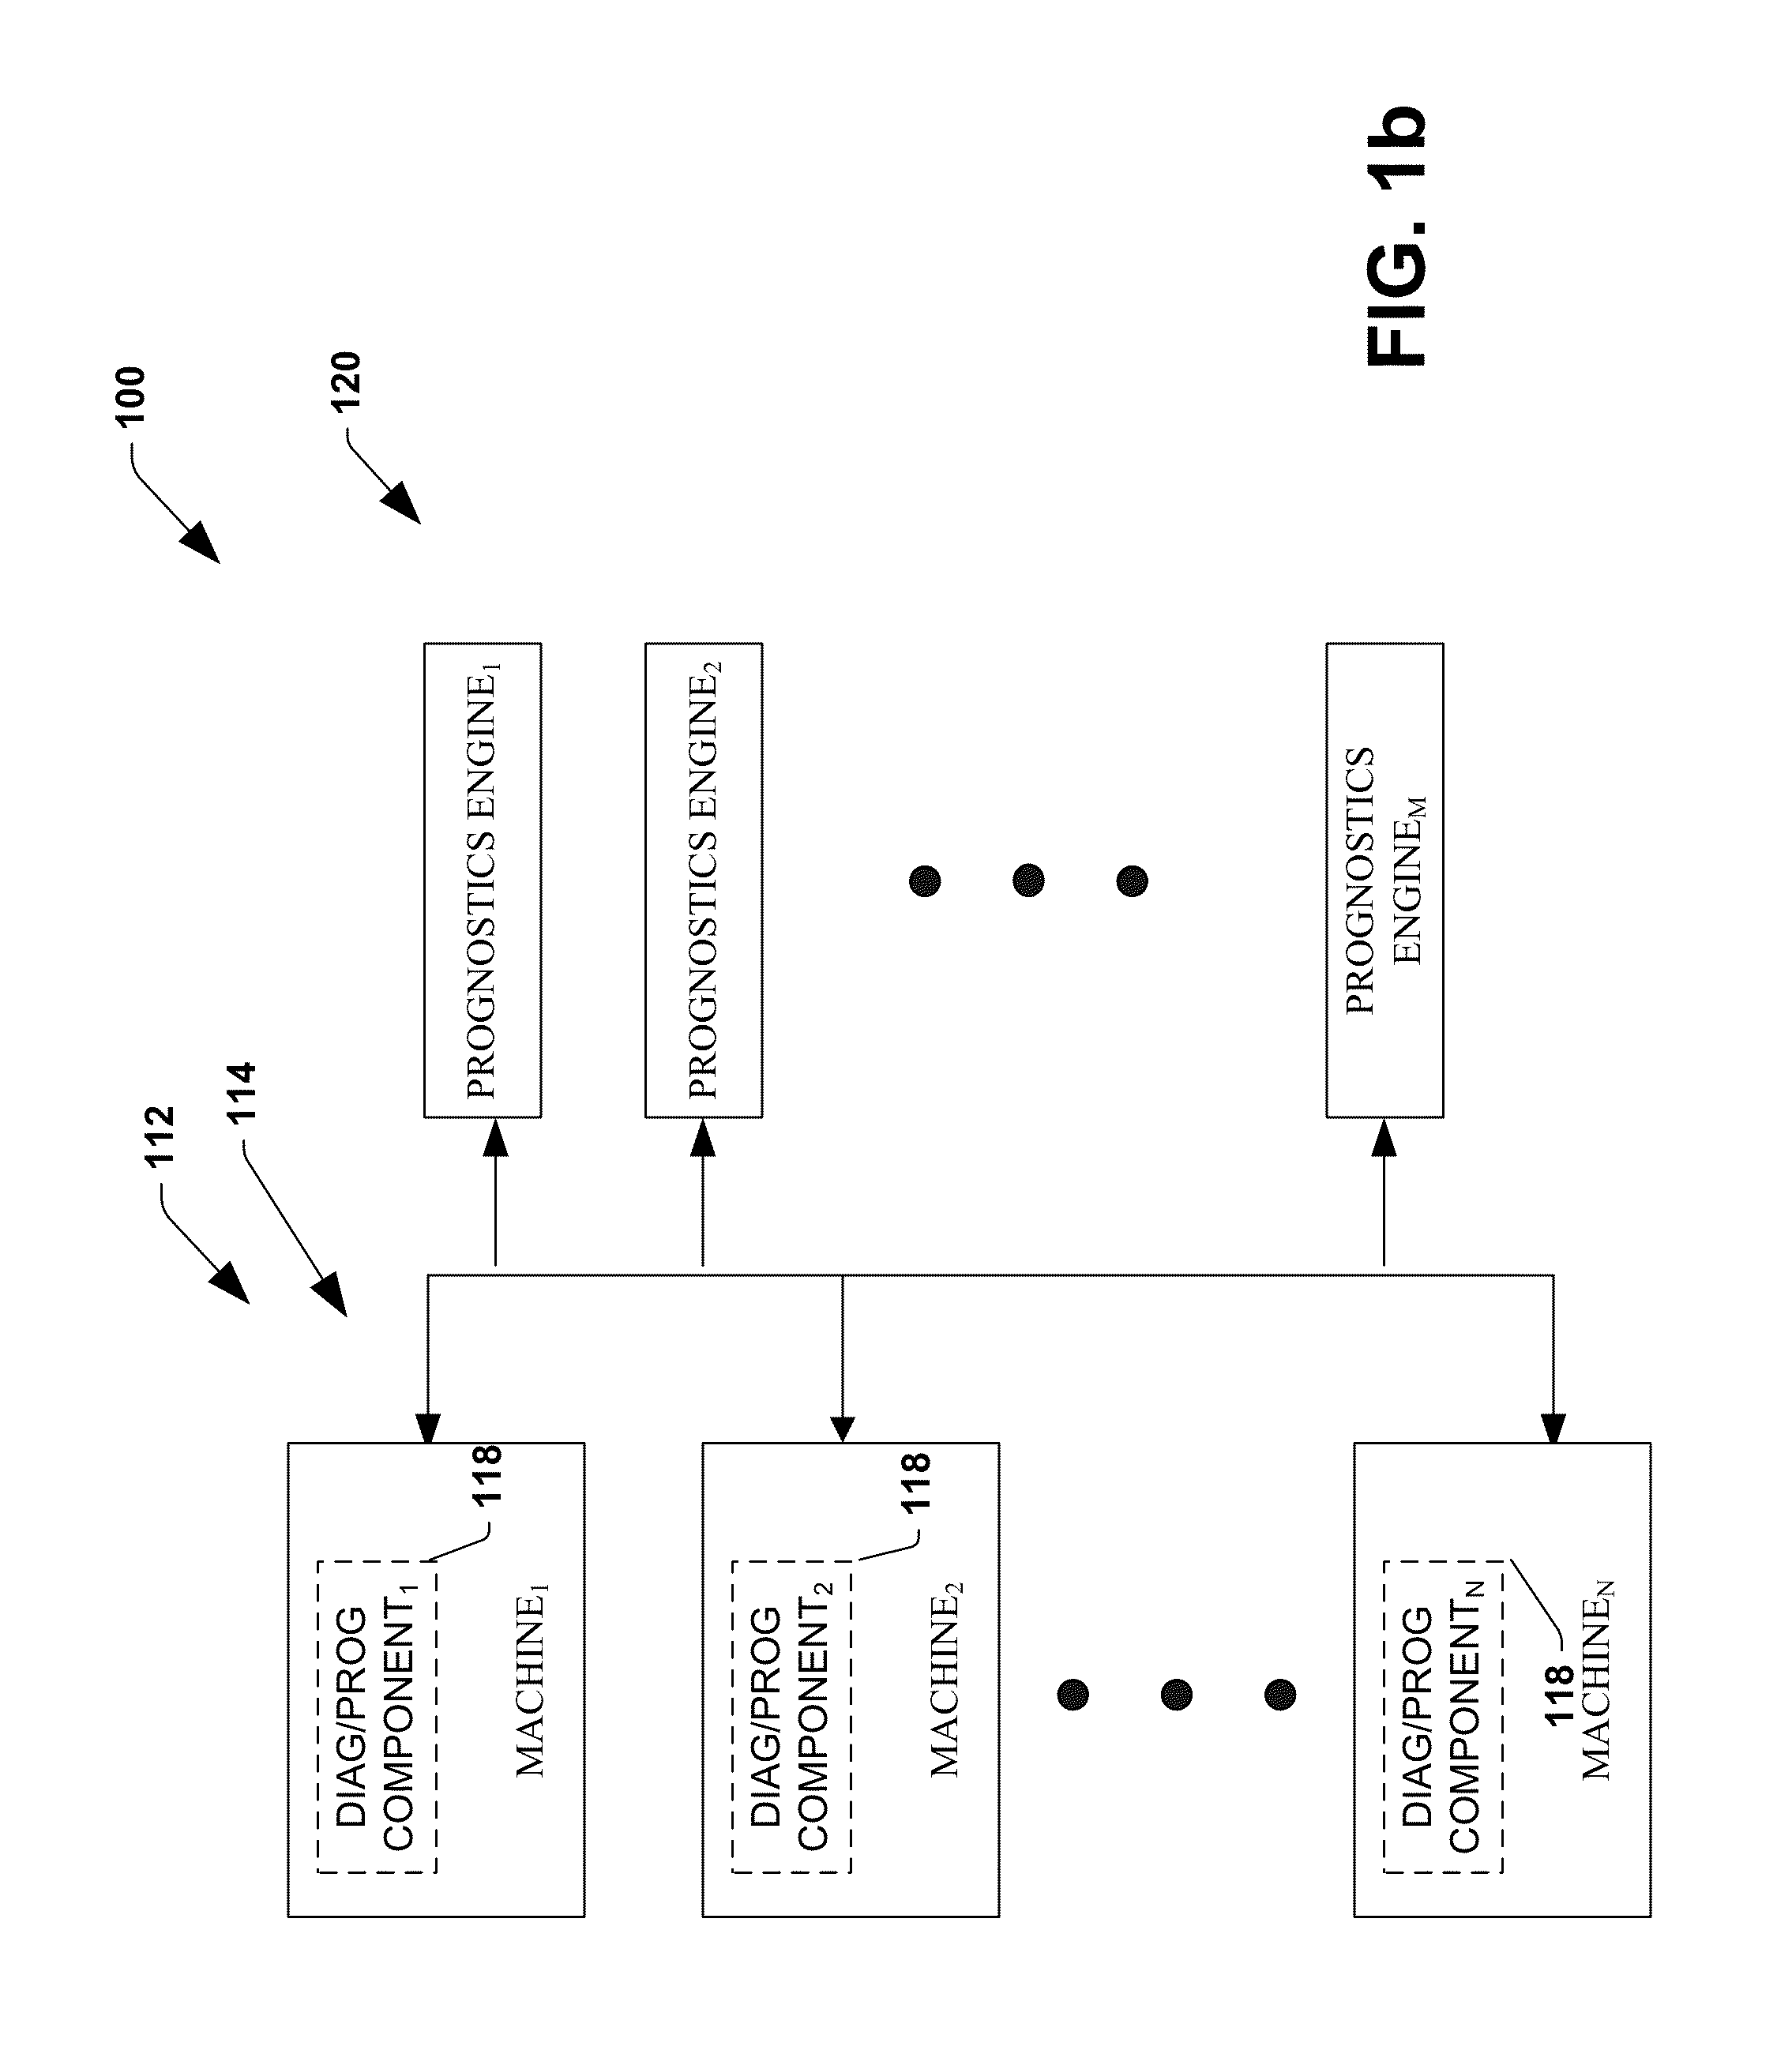 System and method for dynamic multi-objective optimization of machine selection, integration and utilization